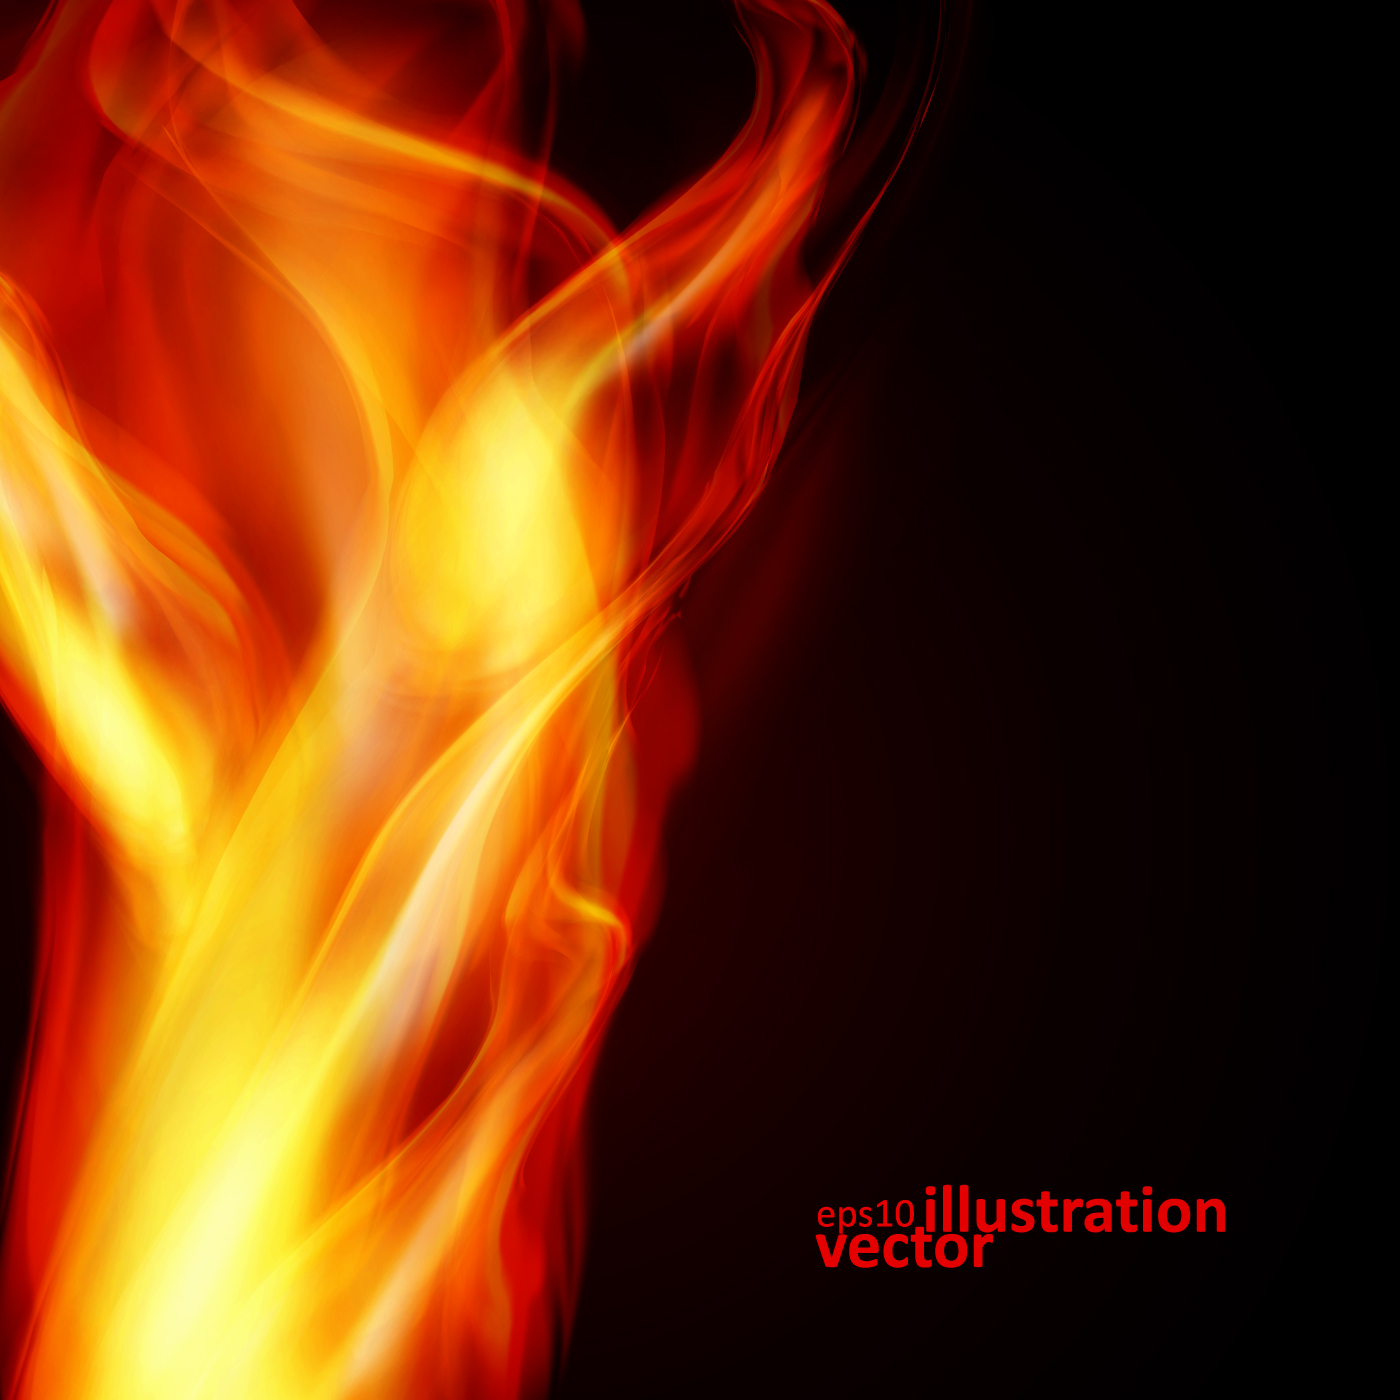 Realistic fiery background illustration vector 02  